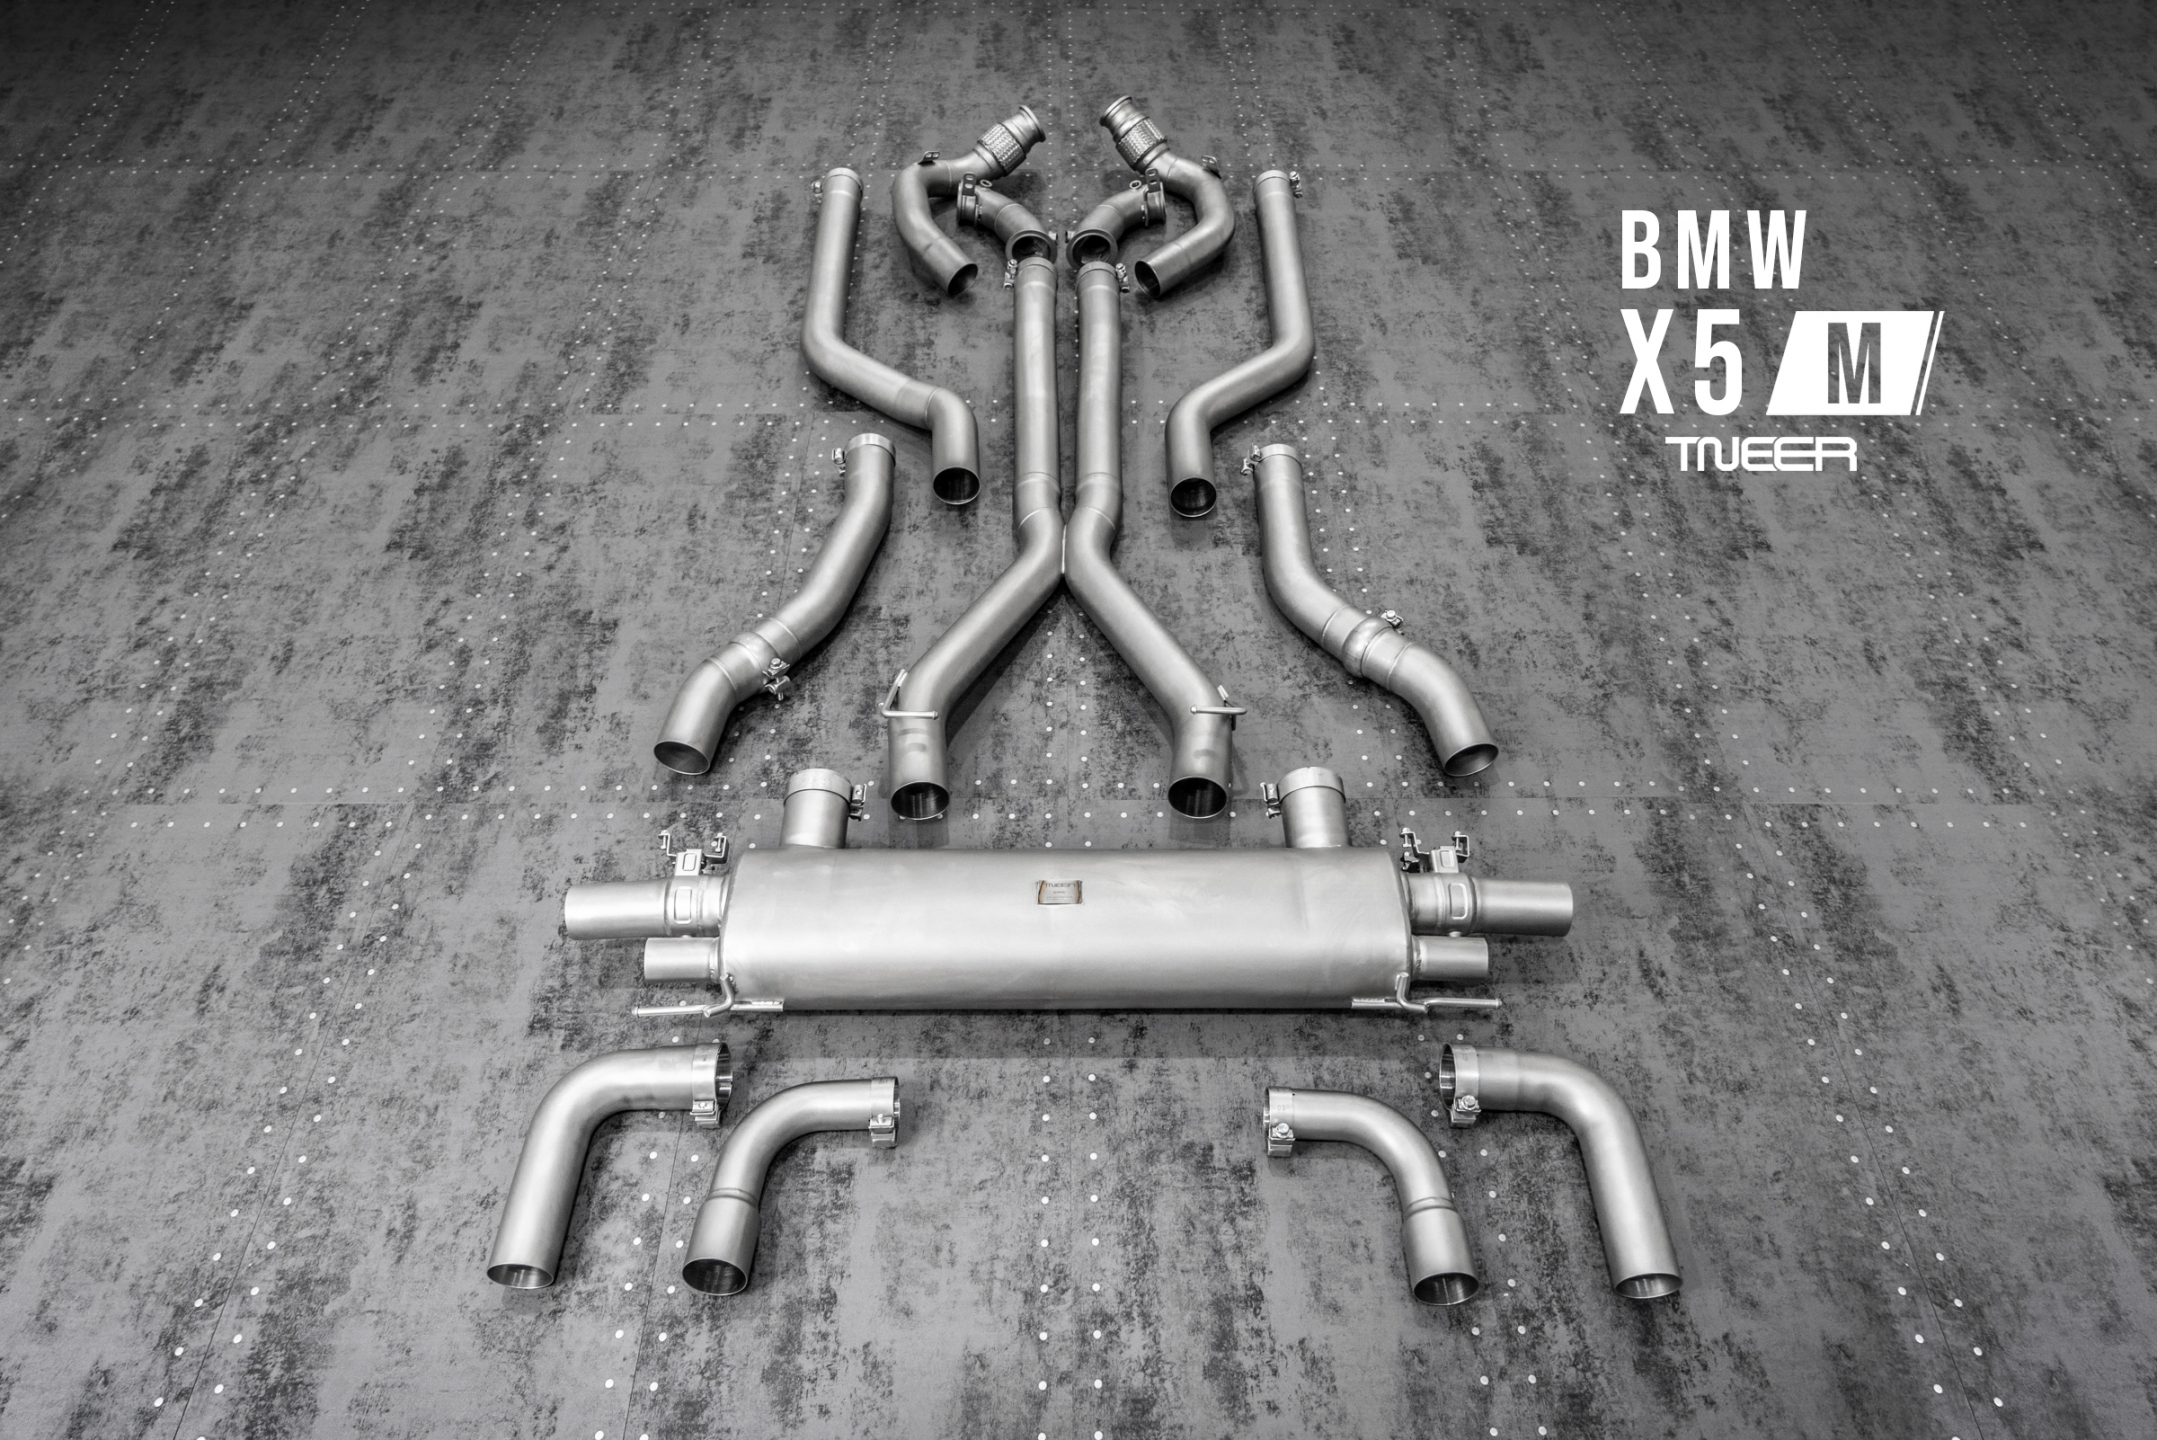 BMW F95 (X5M) TNEER Exhaust System with EV and TACS